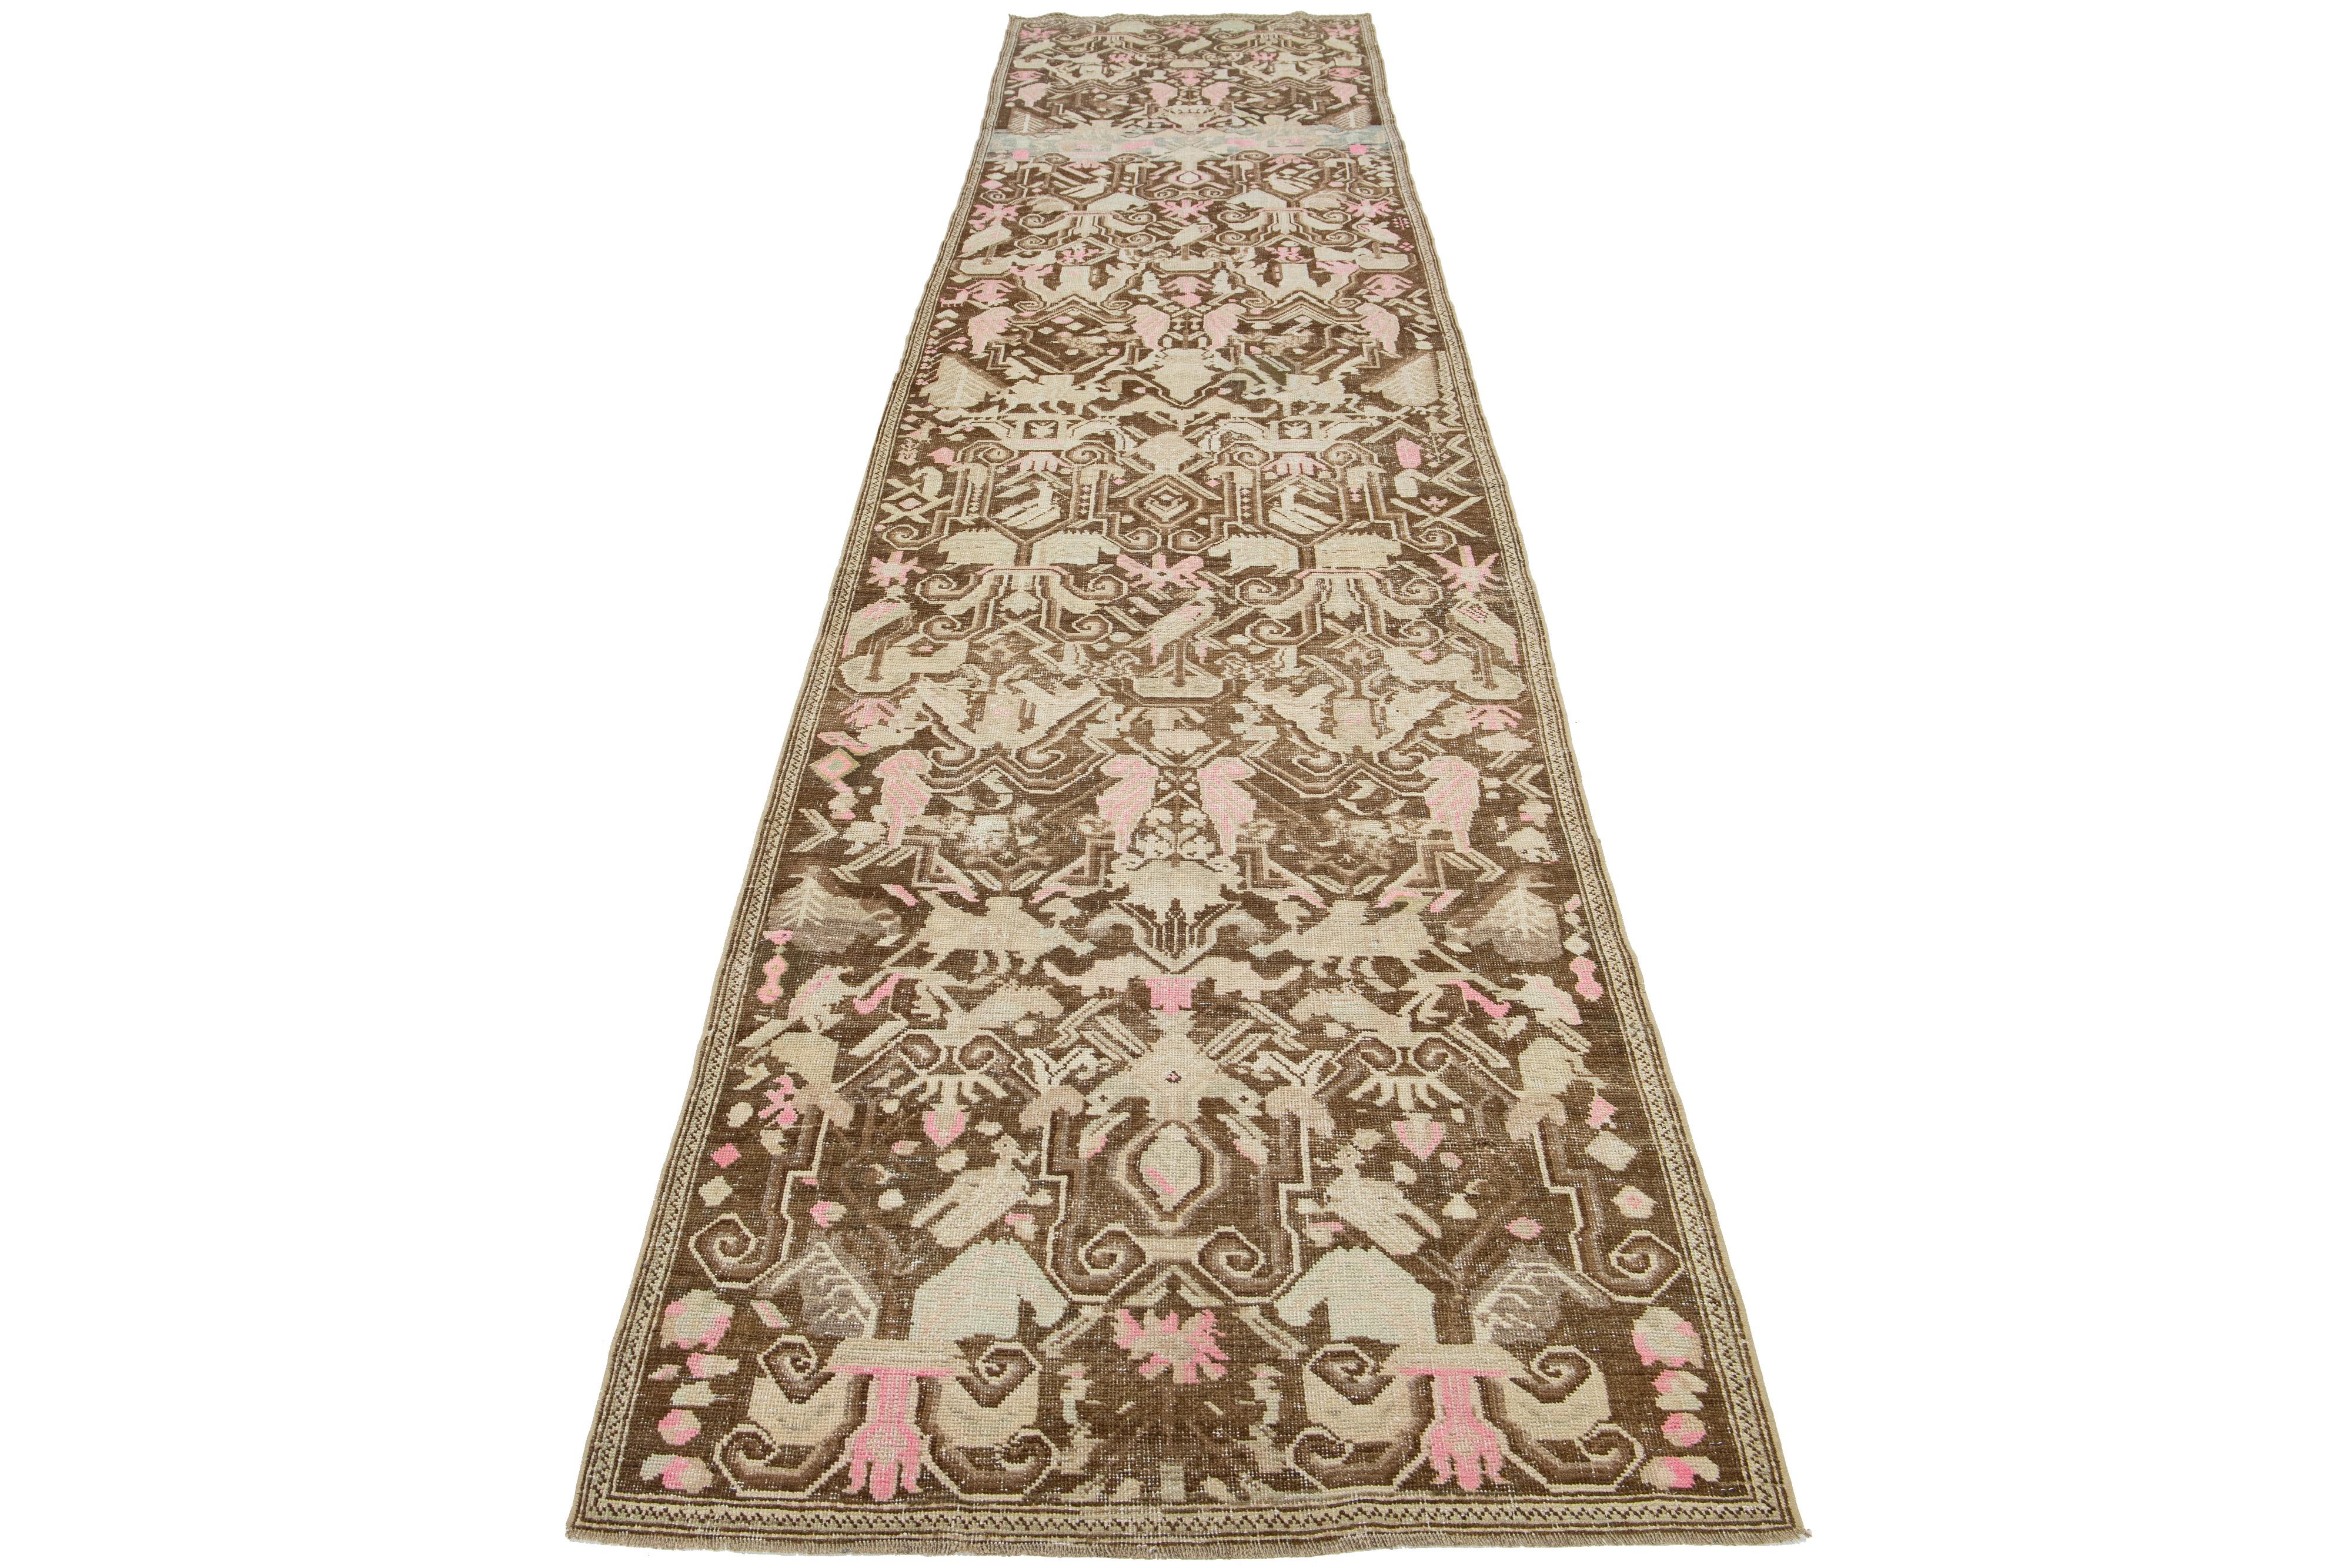 This is a beautiful Antique Karabagh hand-knotted wool runner with a brown-colored field. The rug showcases accents of beige and pink in a stunning all-over design.

This rug measures 3'5